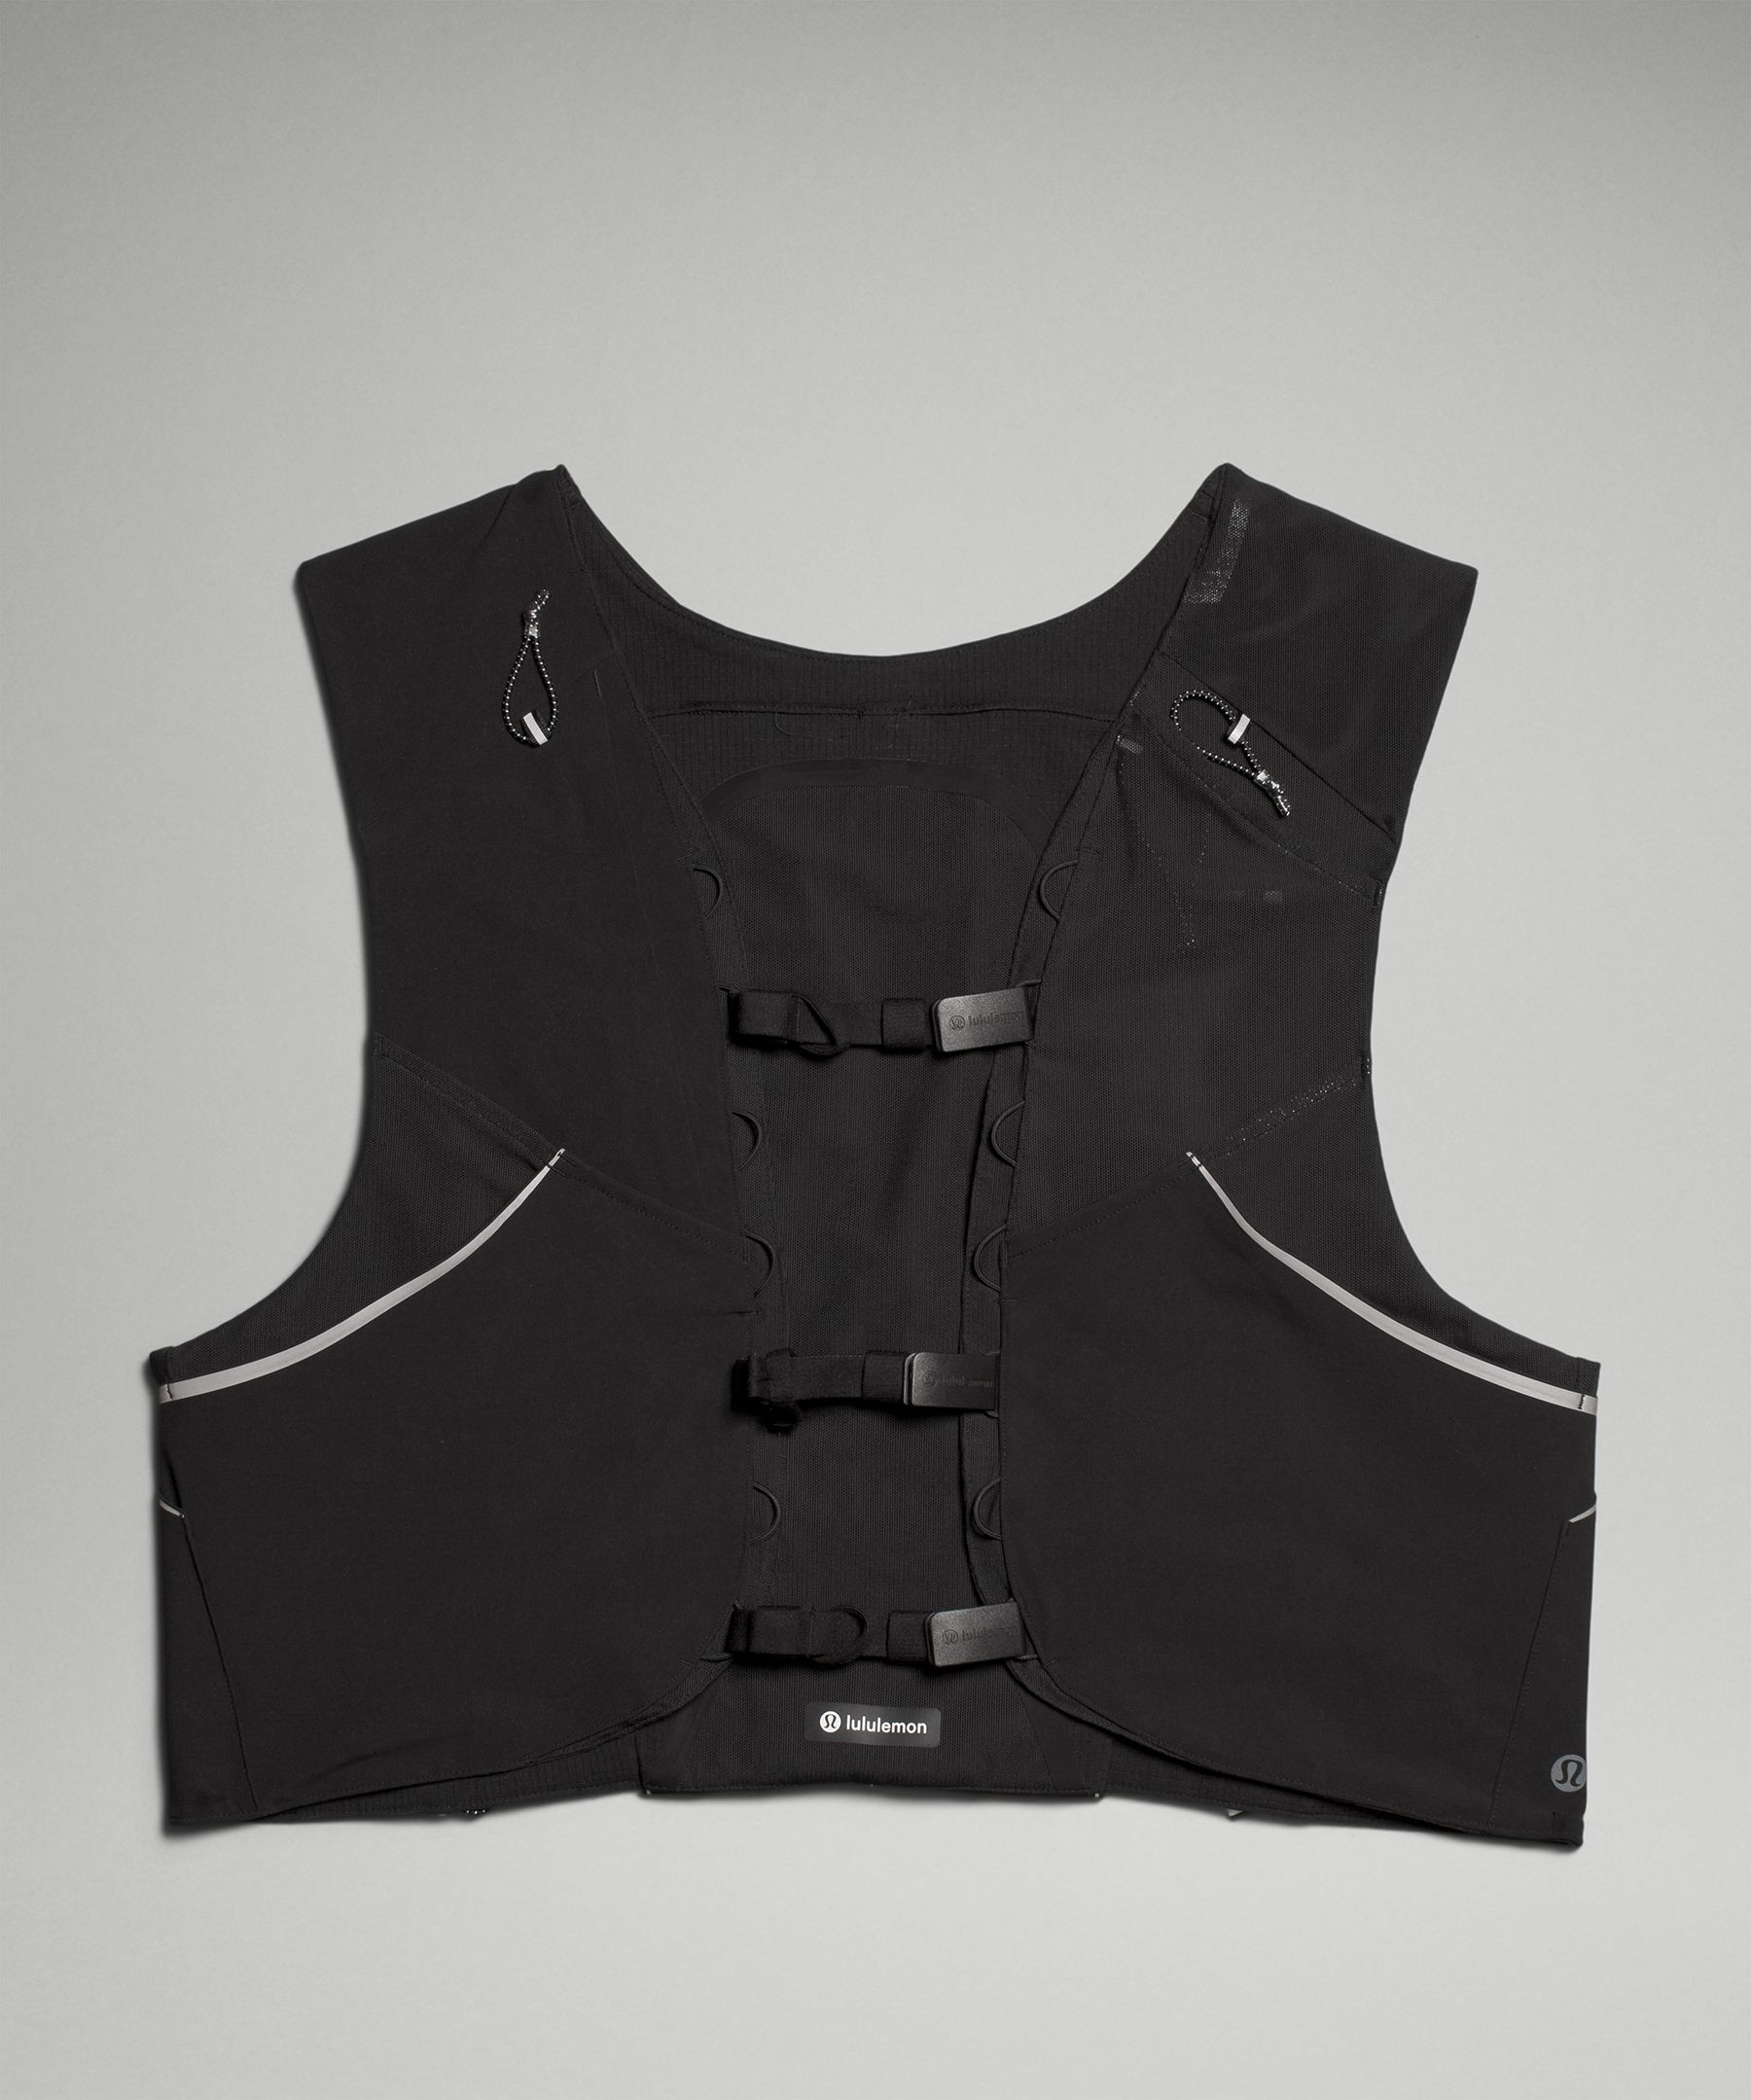 Fast and Free Trail Running Vest, Unisex Sleeveless & Tank Tops